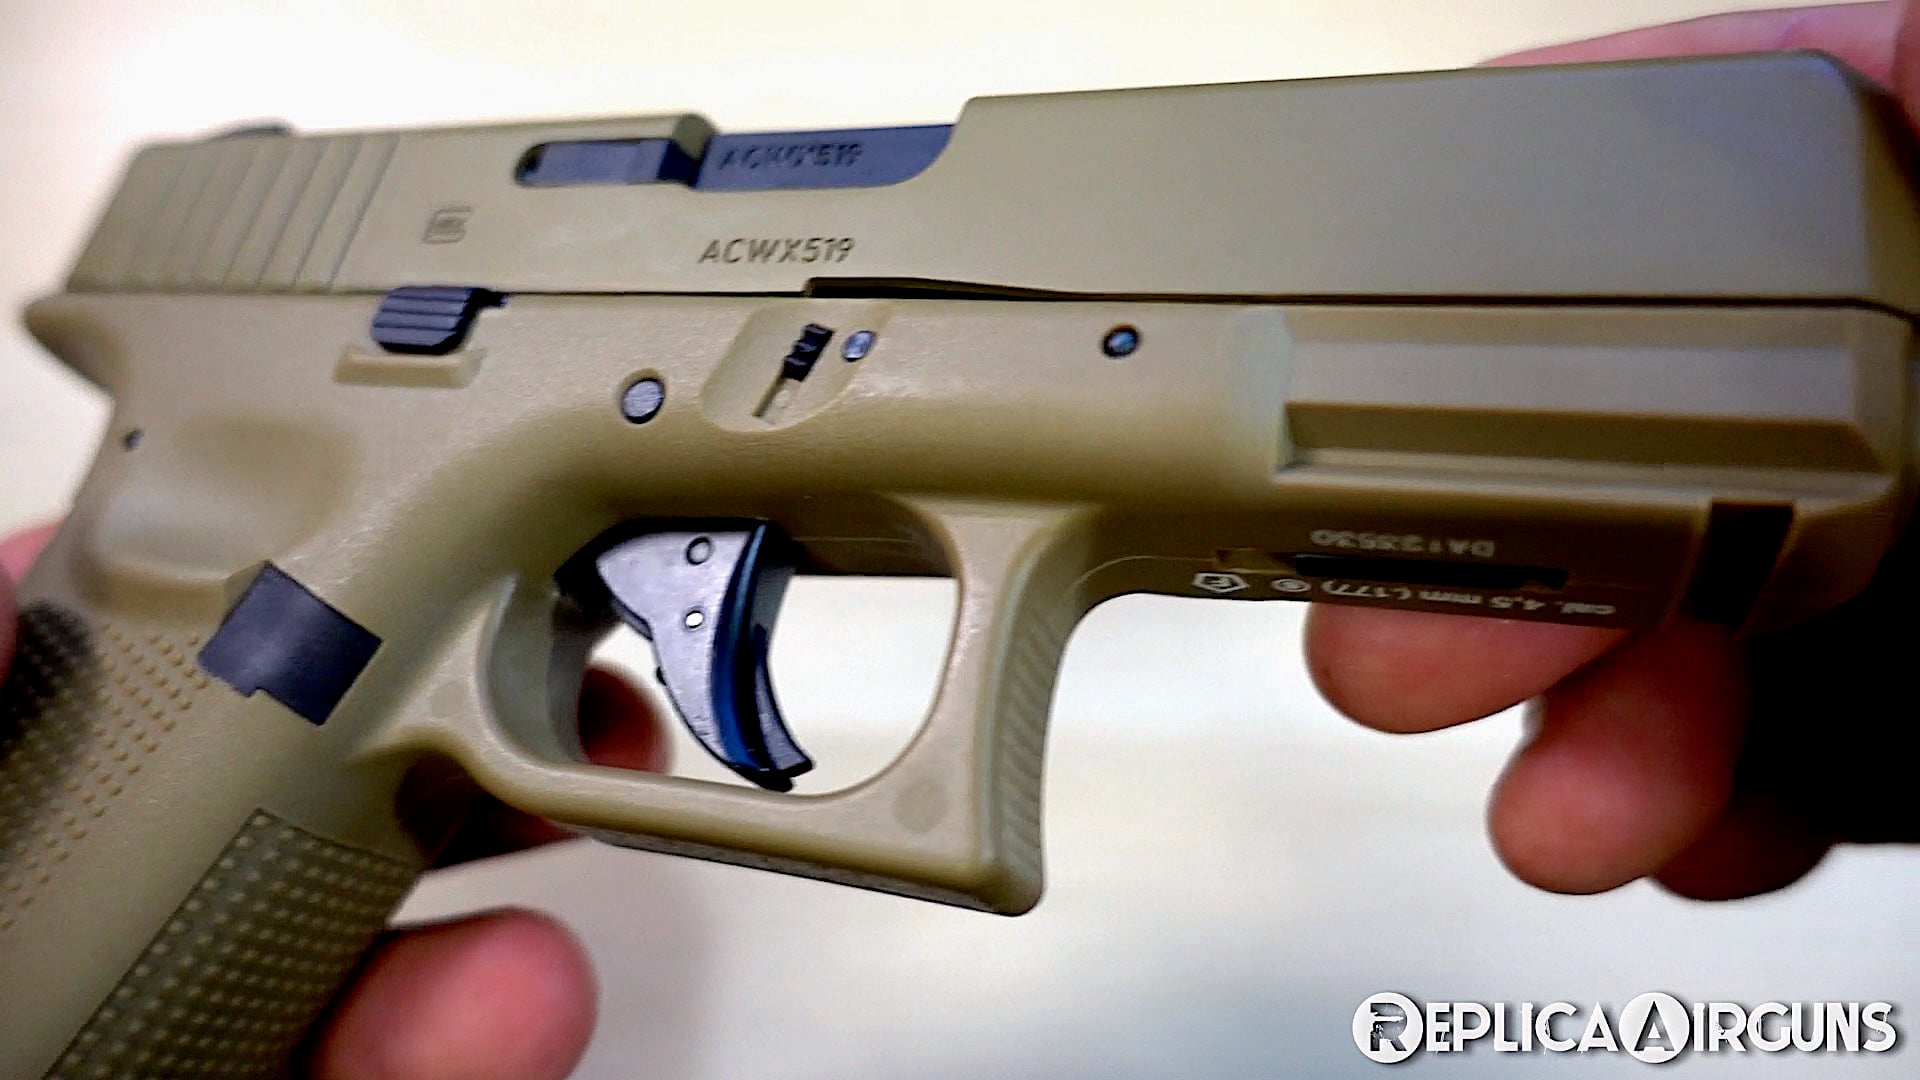 Umarex Glock 19X CO2 Blowback BB Pistol Table Top Review